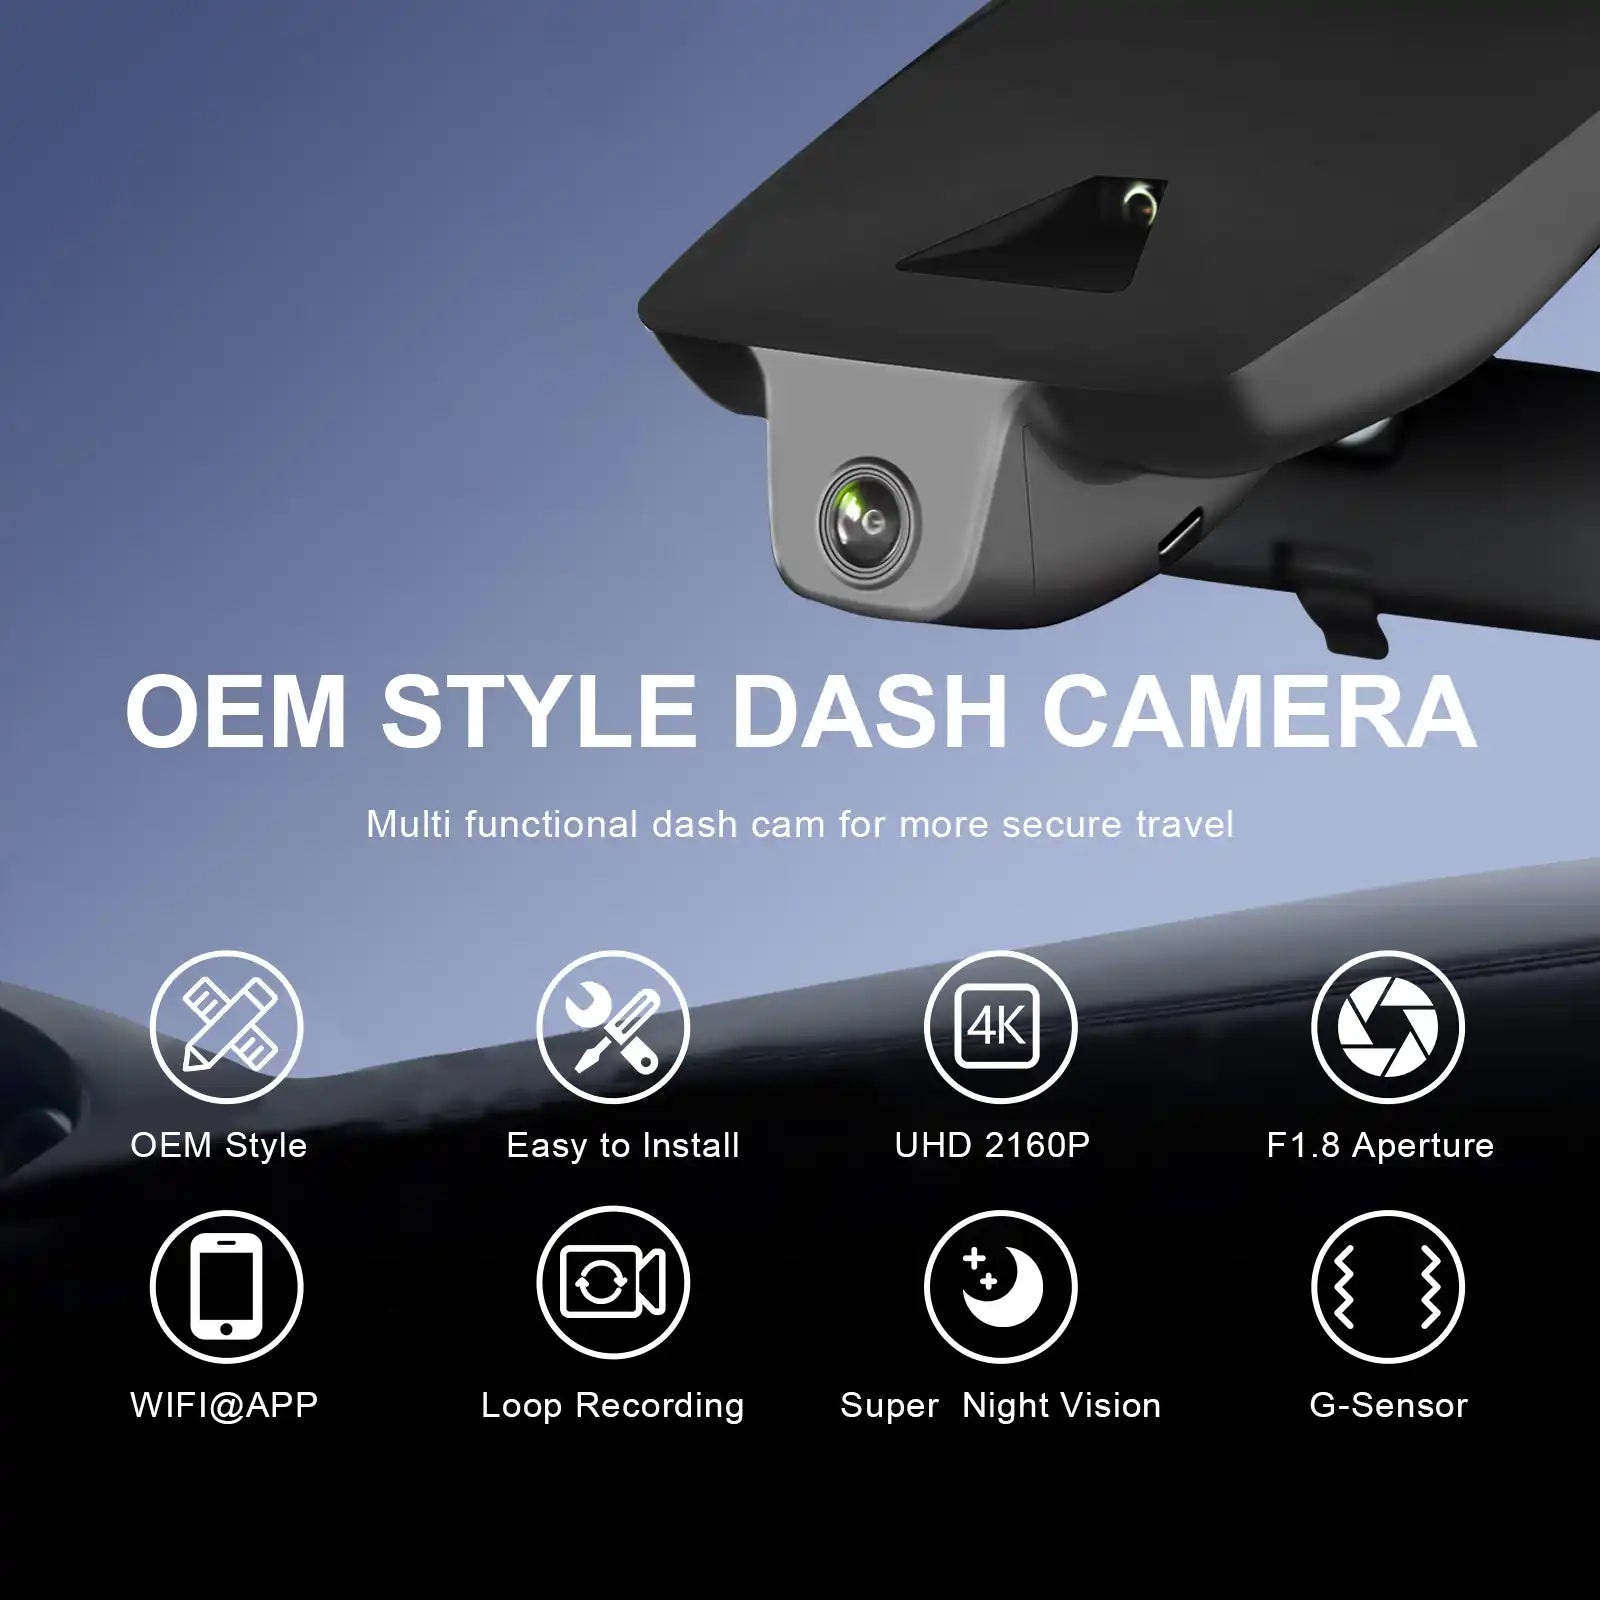 Mangoal 4K Dash Cam fit for Toyota Camry(Model B) Gen8 XV70 2018 2019 2020 Hybrid XLE XSE Nightshade TRD V6, Integrated OEM Look, UHD 2160P Video, App & WiFi, Free App and 128GB Card